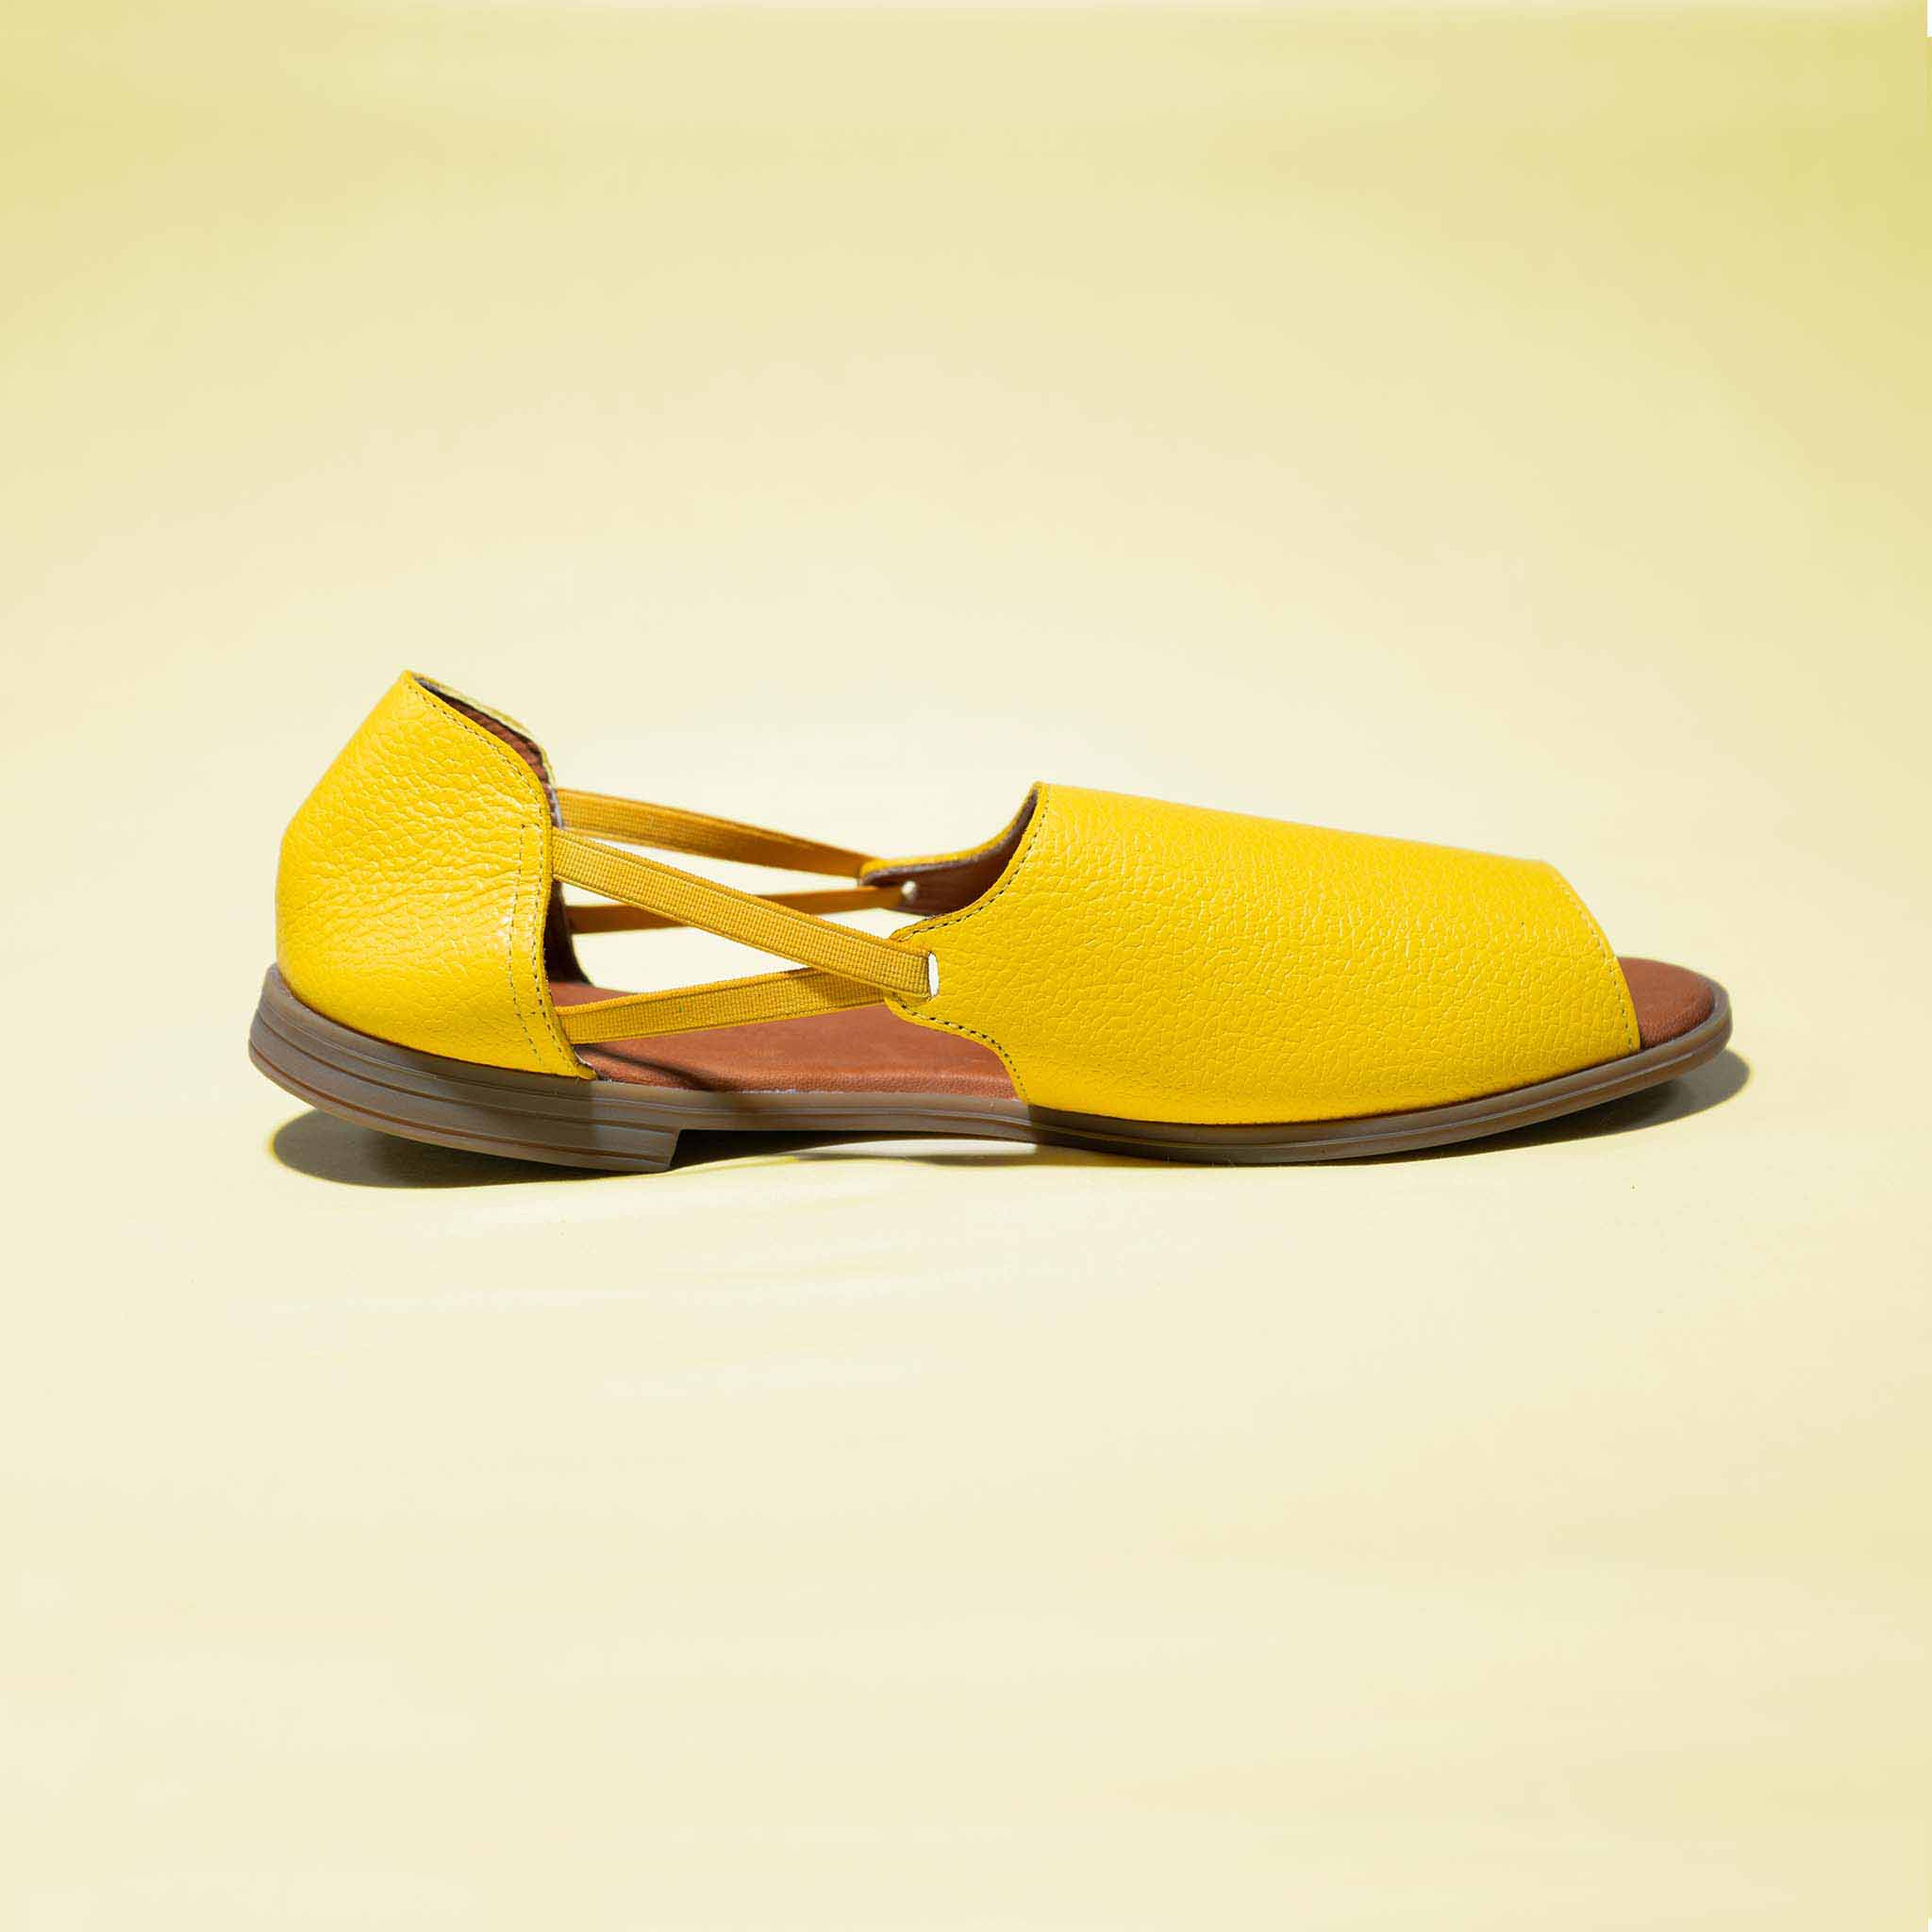 Womads yellow sandals side view